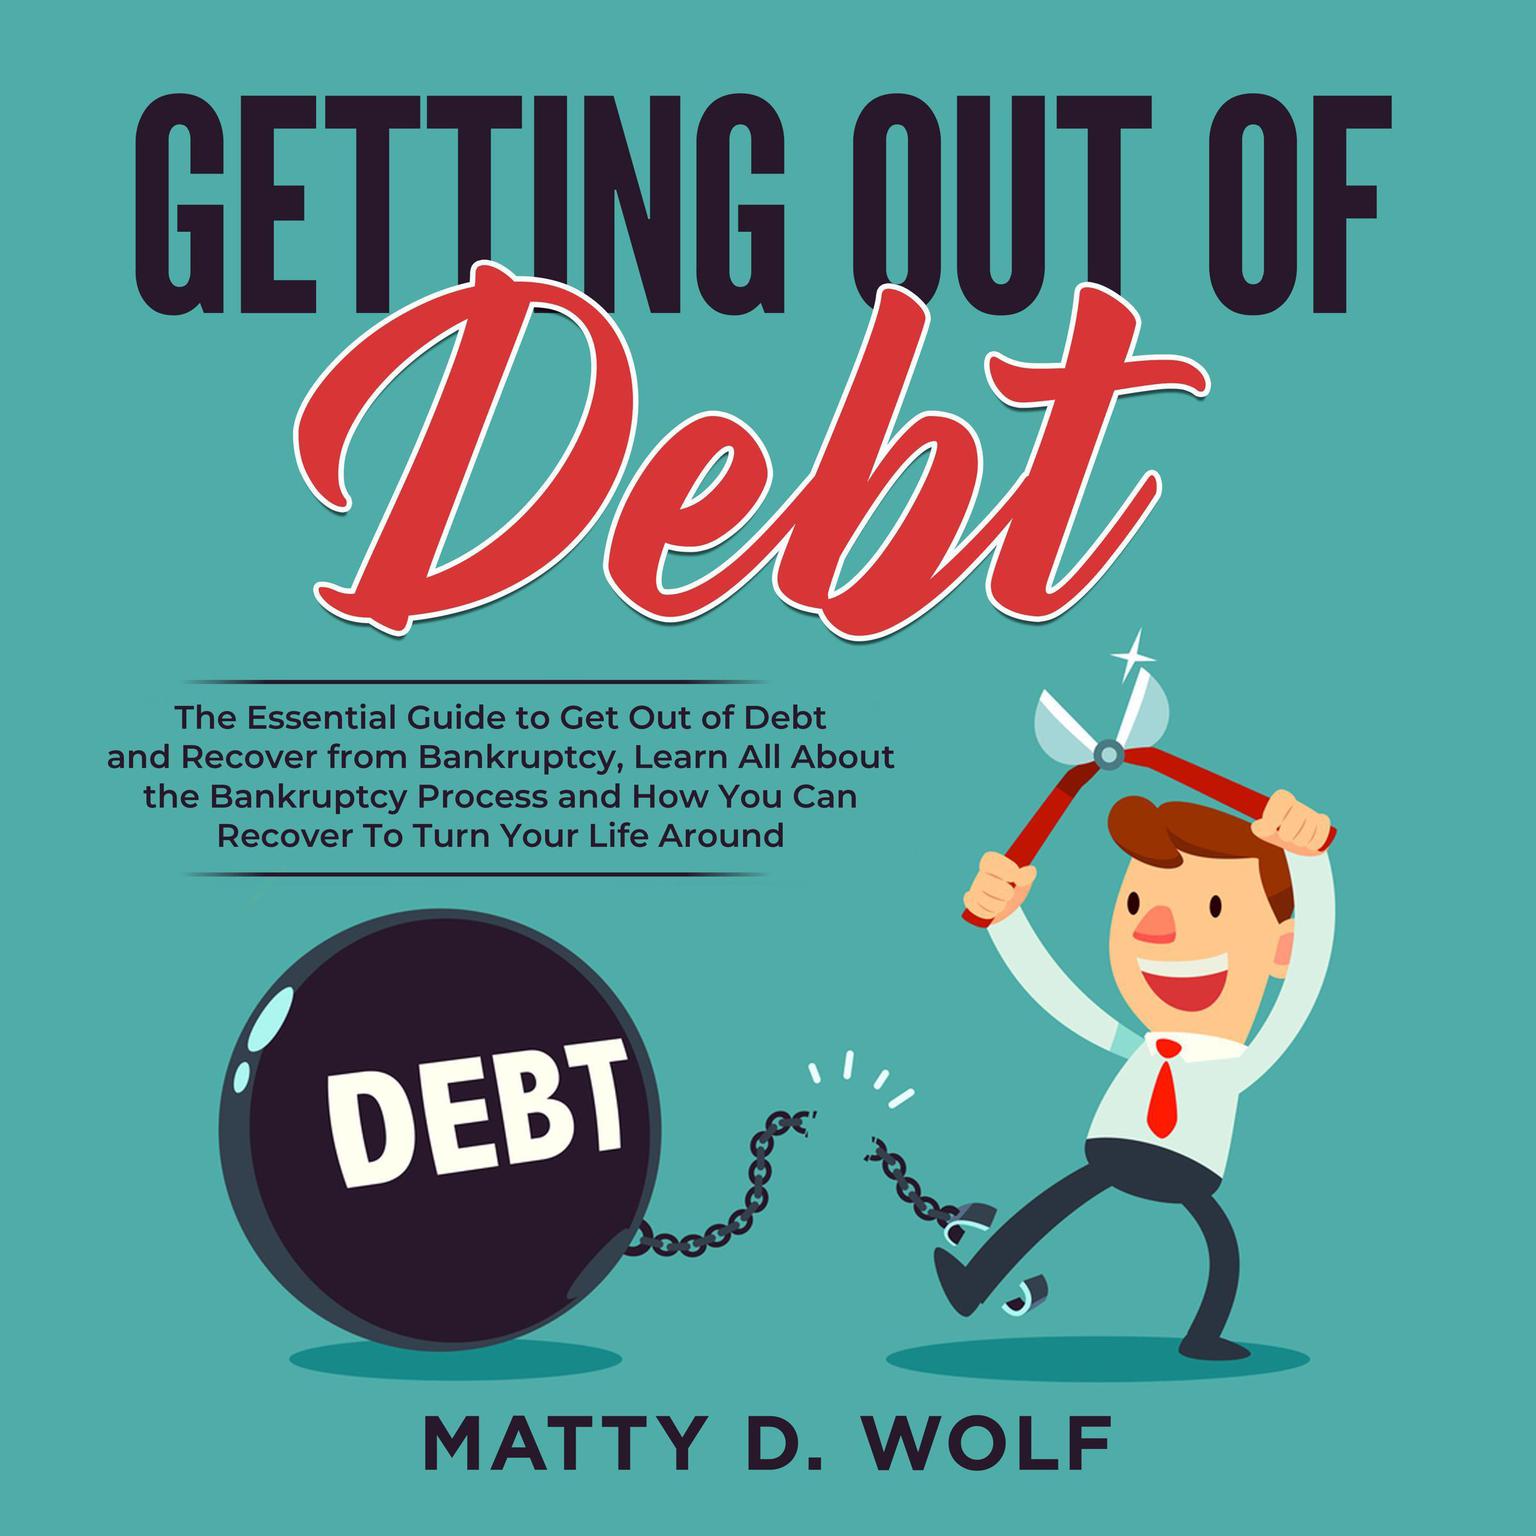 Getting Out of Debt: The Essential Guide to Get Out of Debt and Recover from Bankruptcy, Learn All About the Bankruptcy Process and How You Can Recover To Turn Your Life Around Audiobook, by Matty D. Wolf